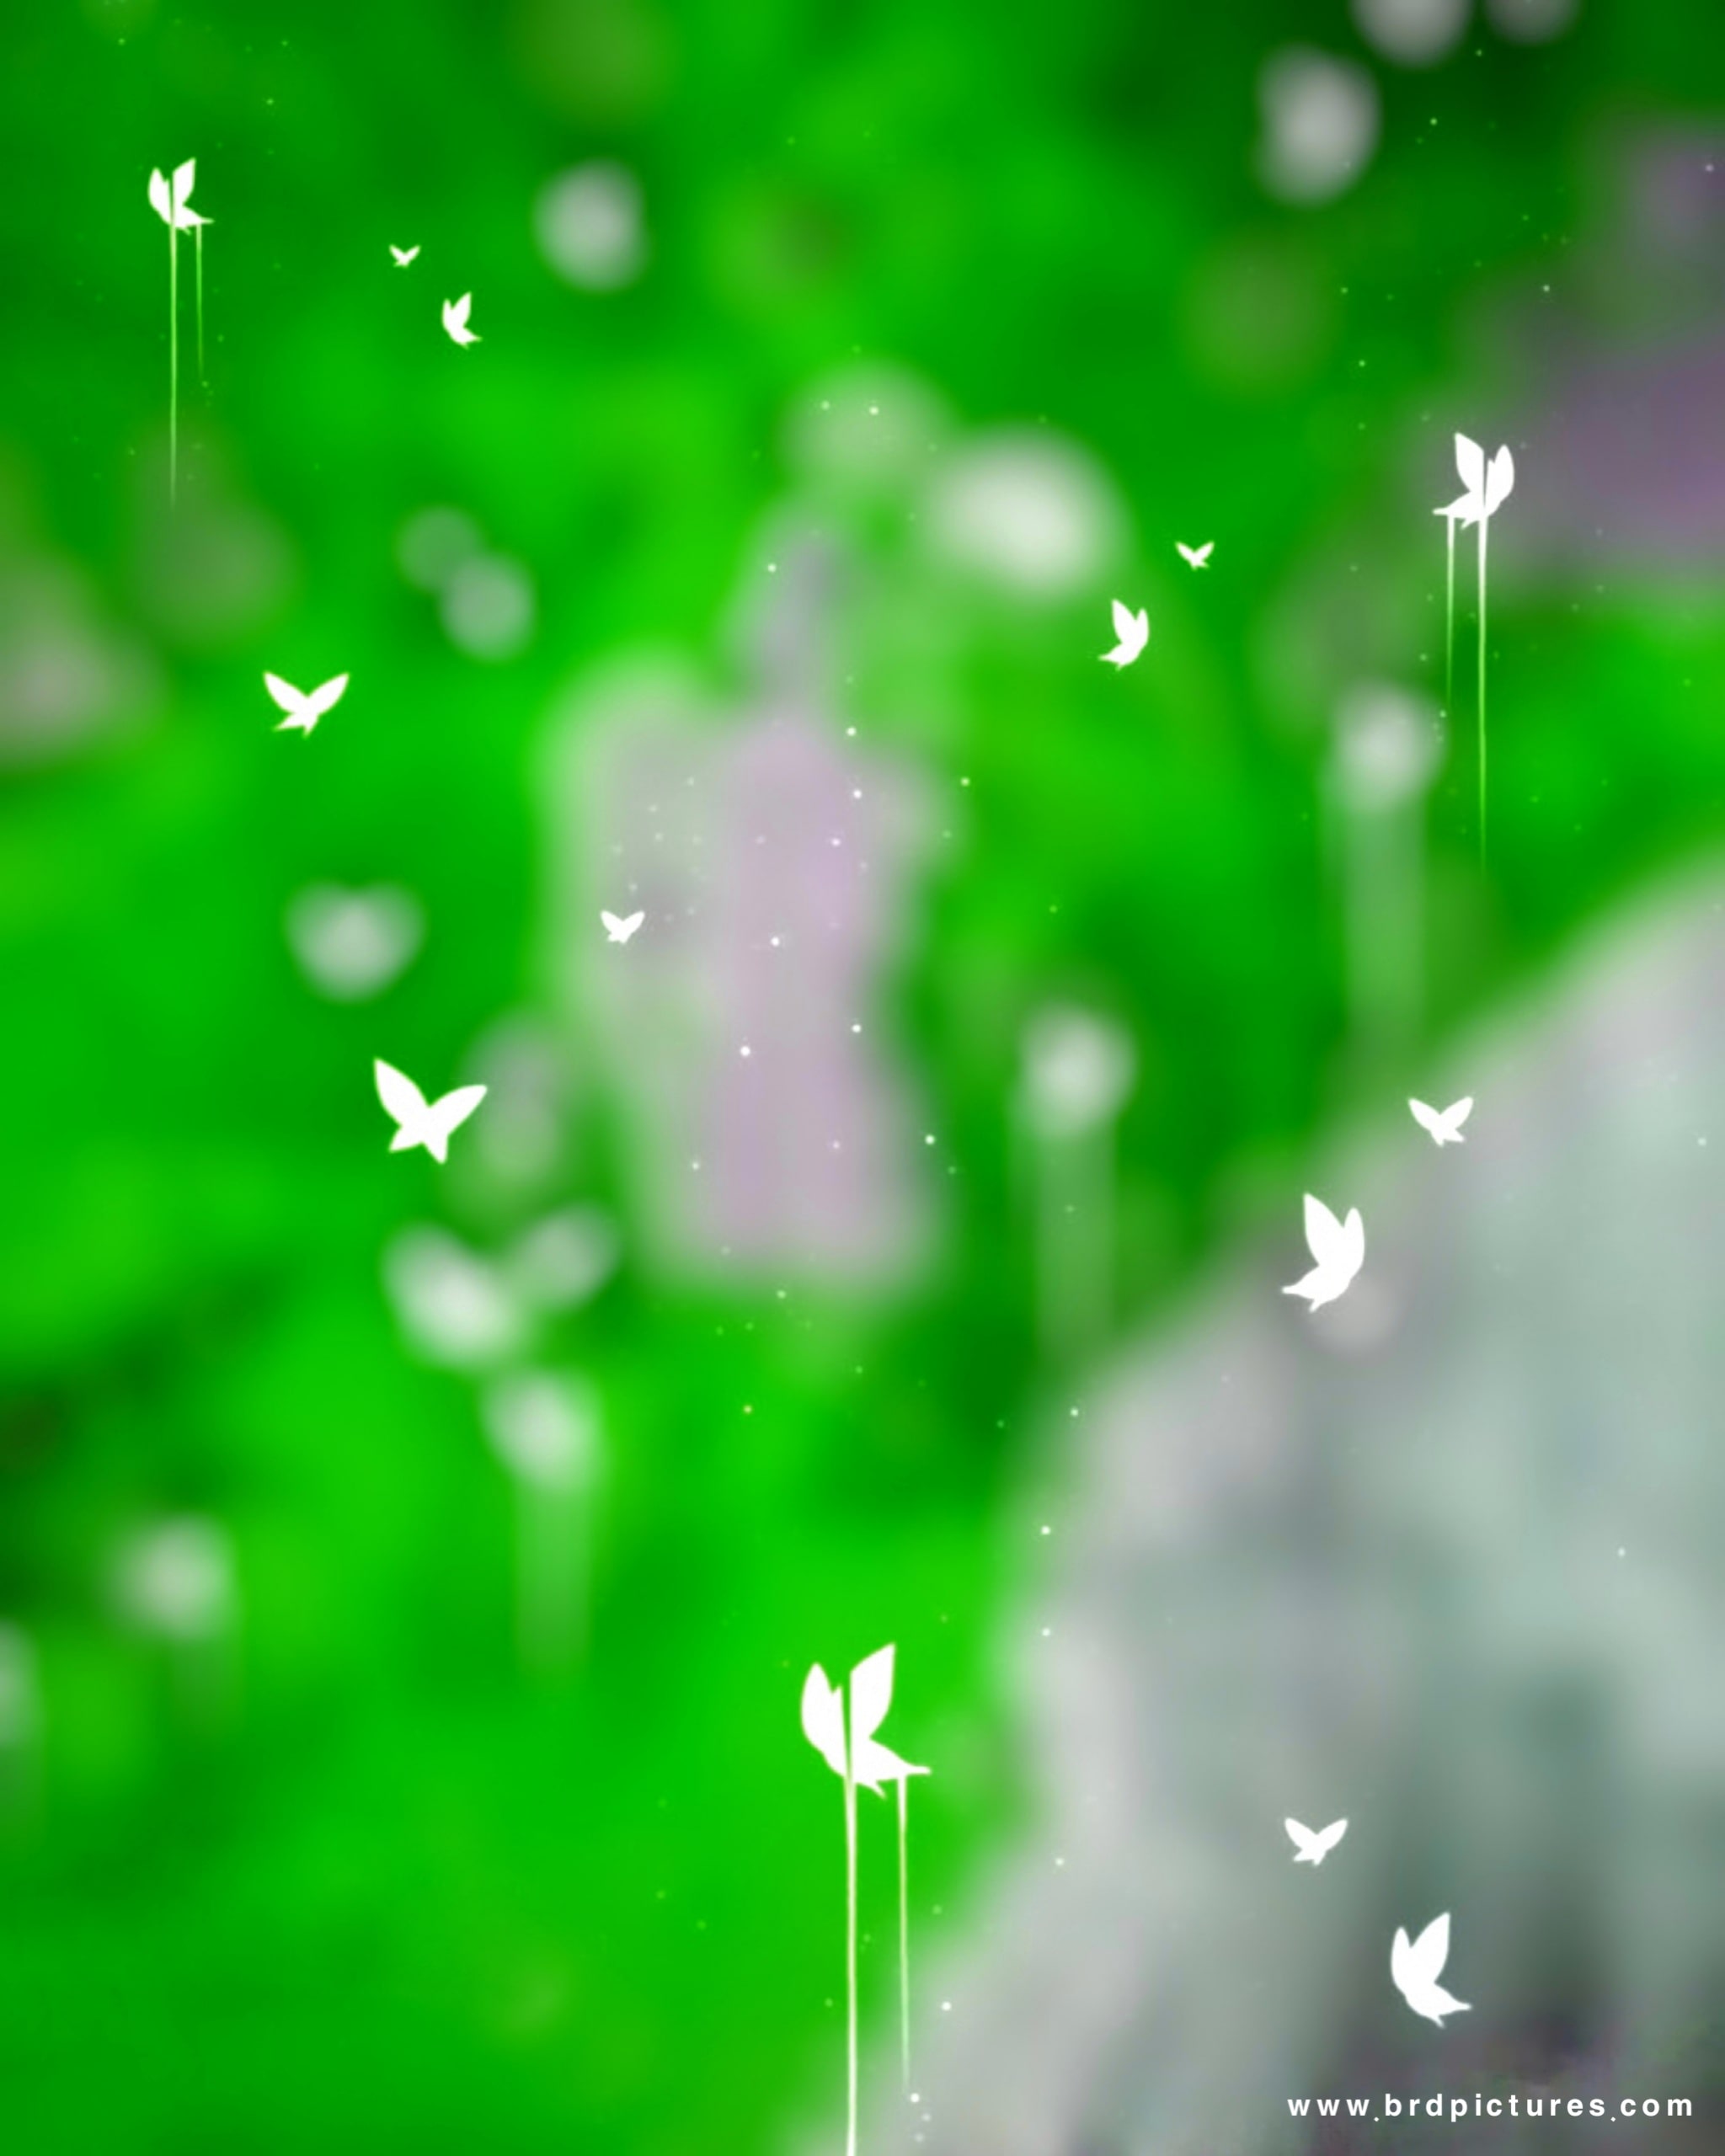 Butterfly Effect CB Background HD For Snapseed Editing 